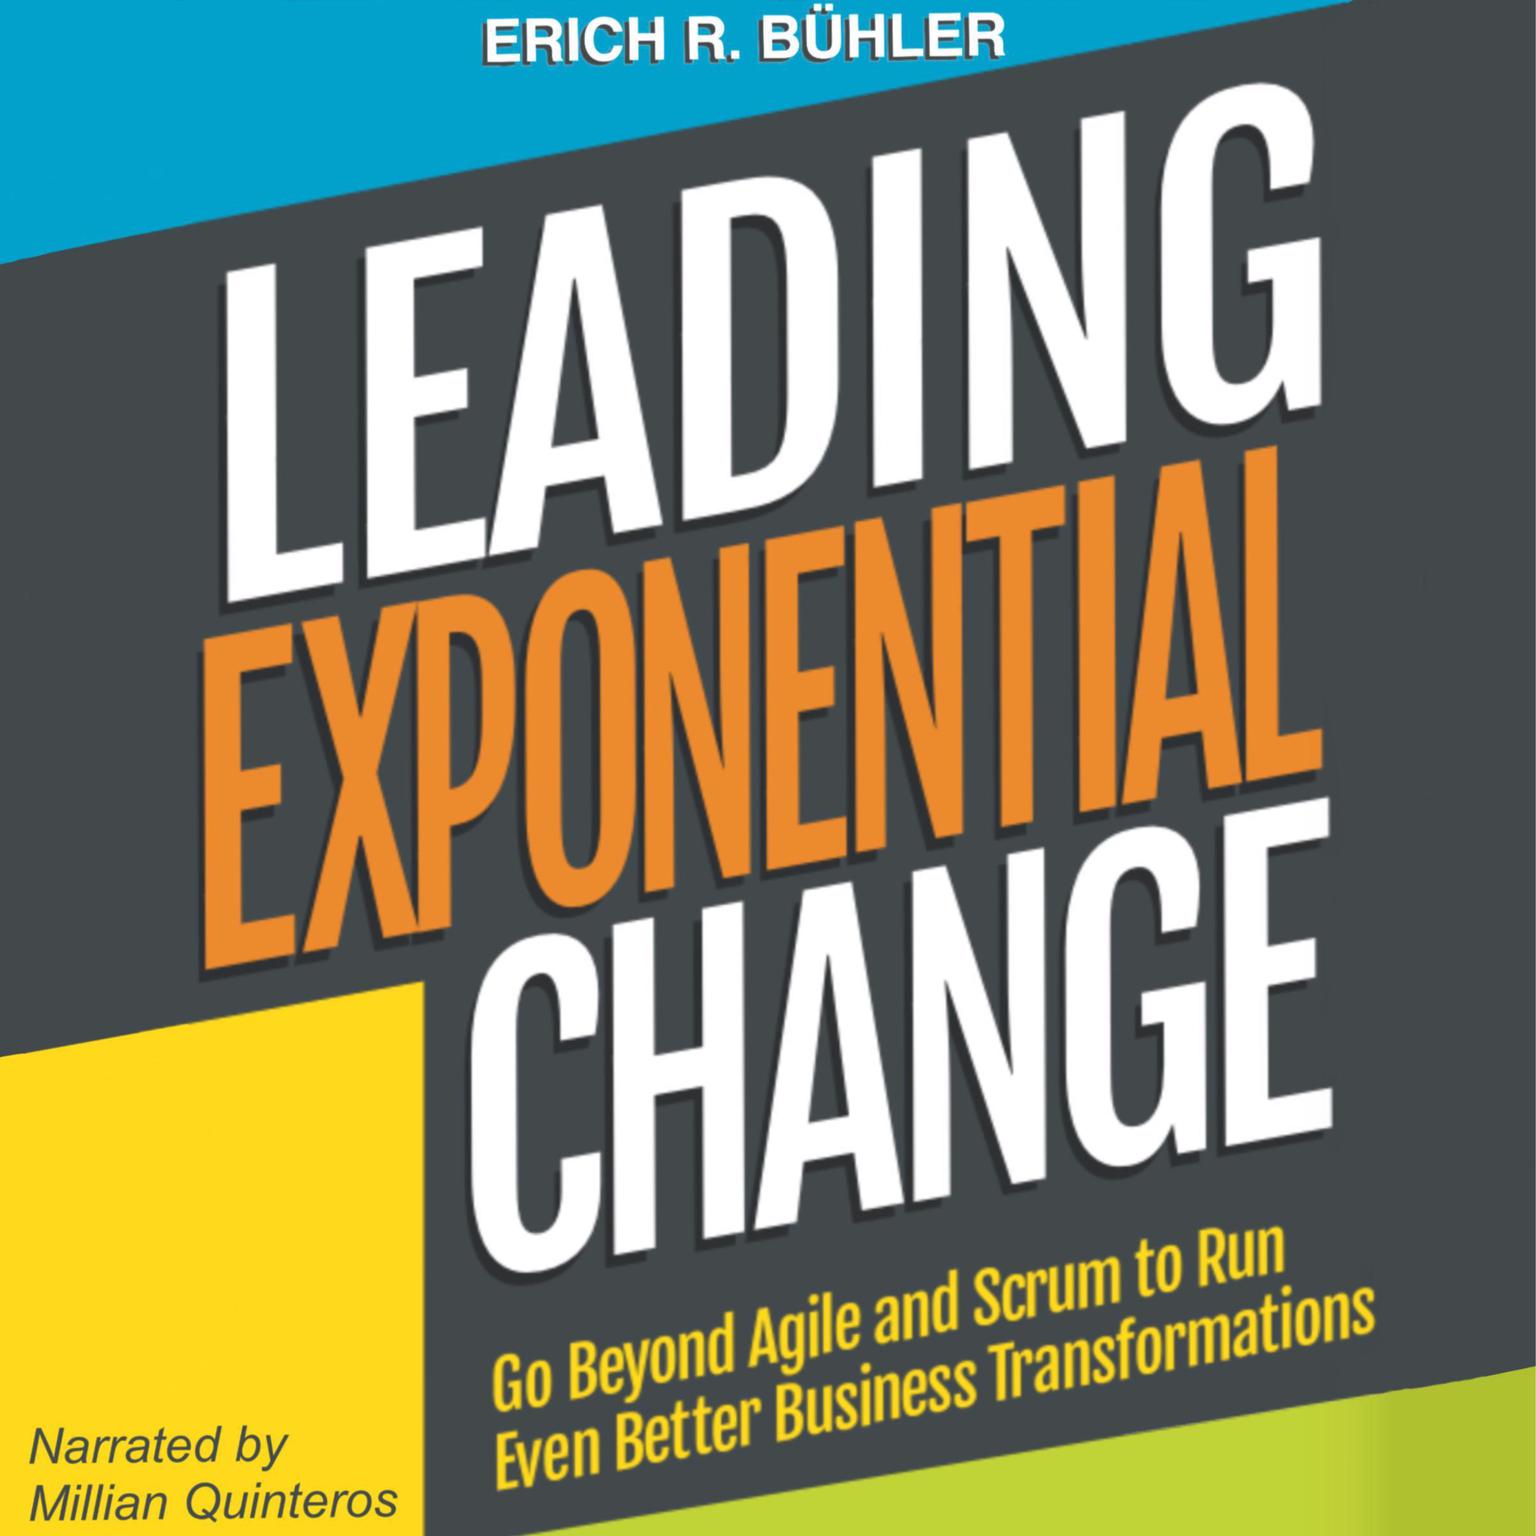 Leading Exponential Change: Go beyond Agile and Scrum to Run Even Better Business Transformations  Audiobook, by Erich R. Bühler